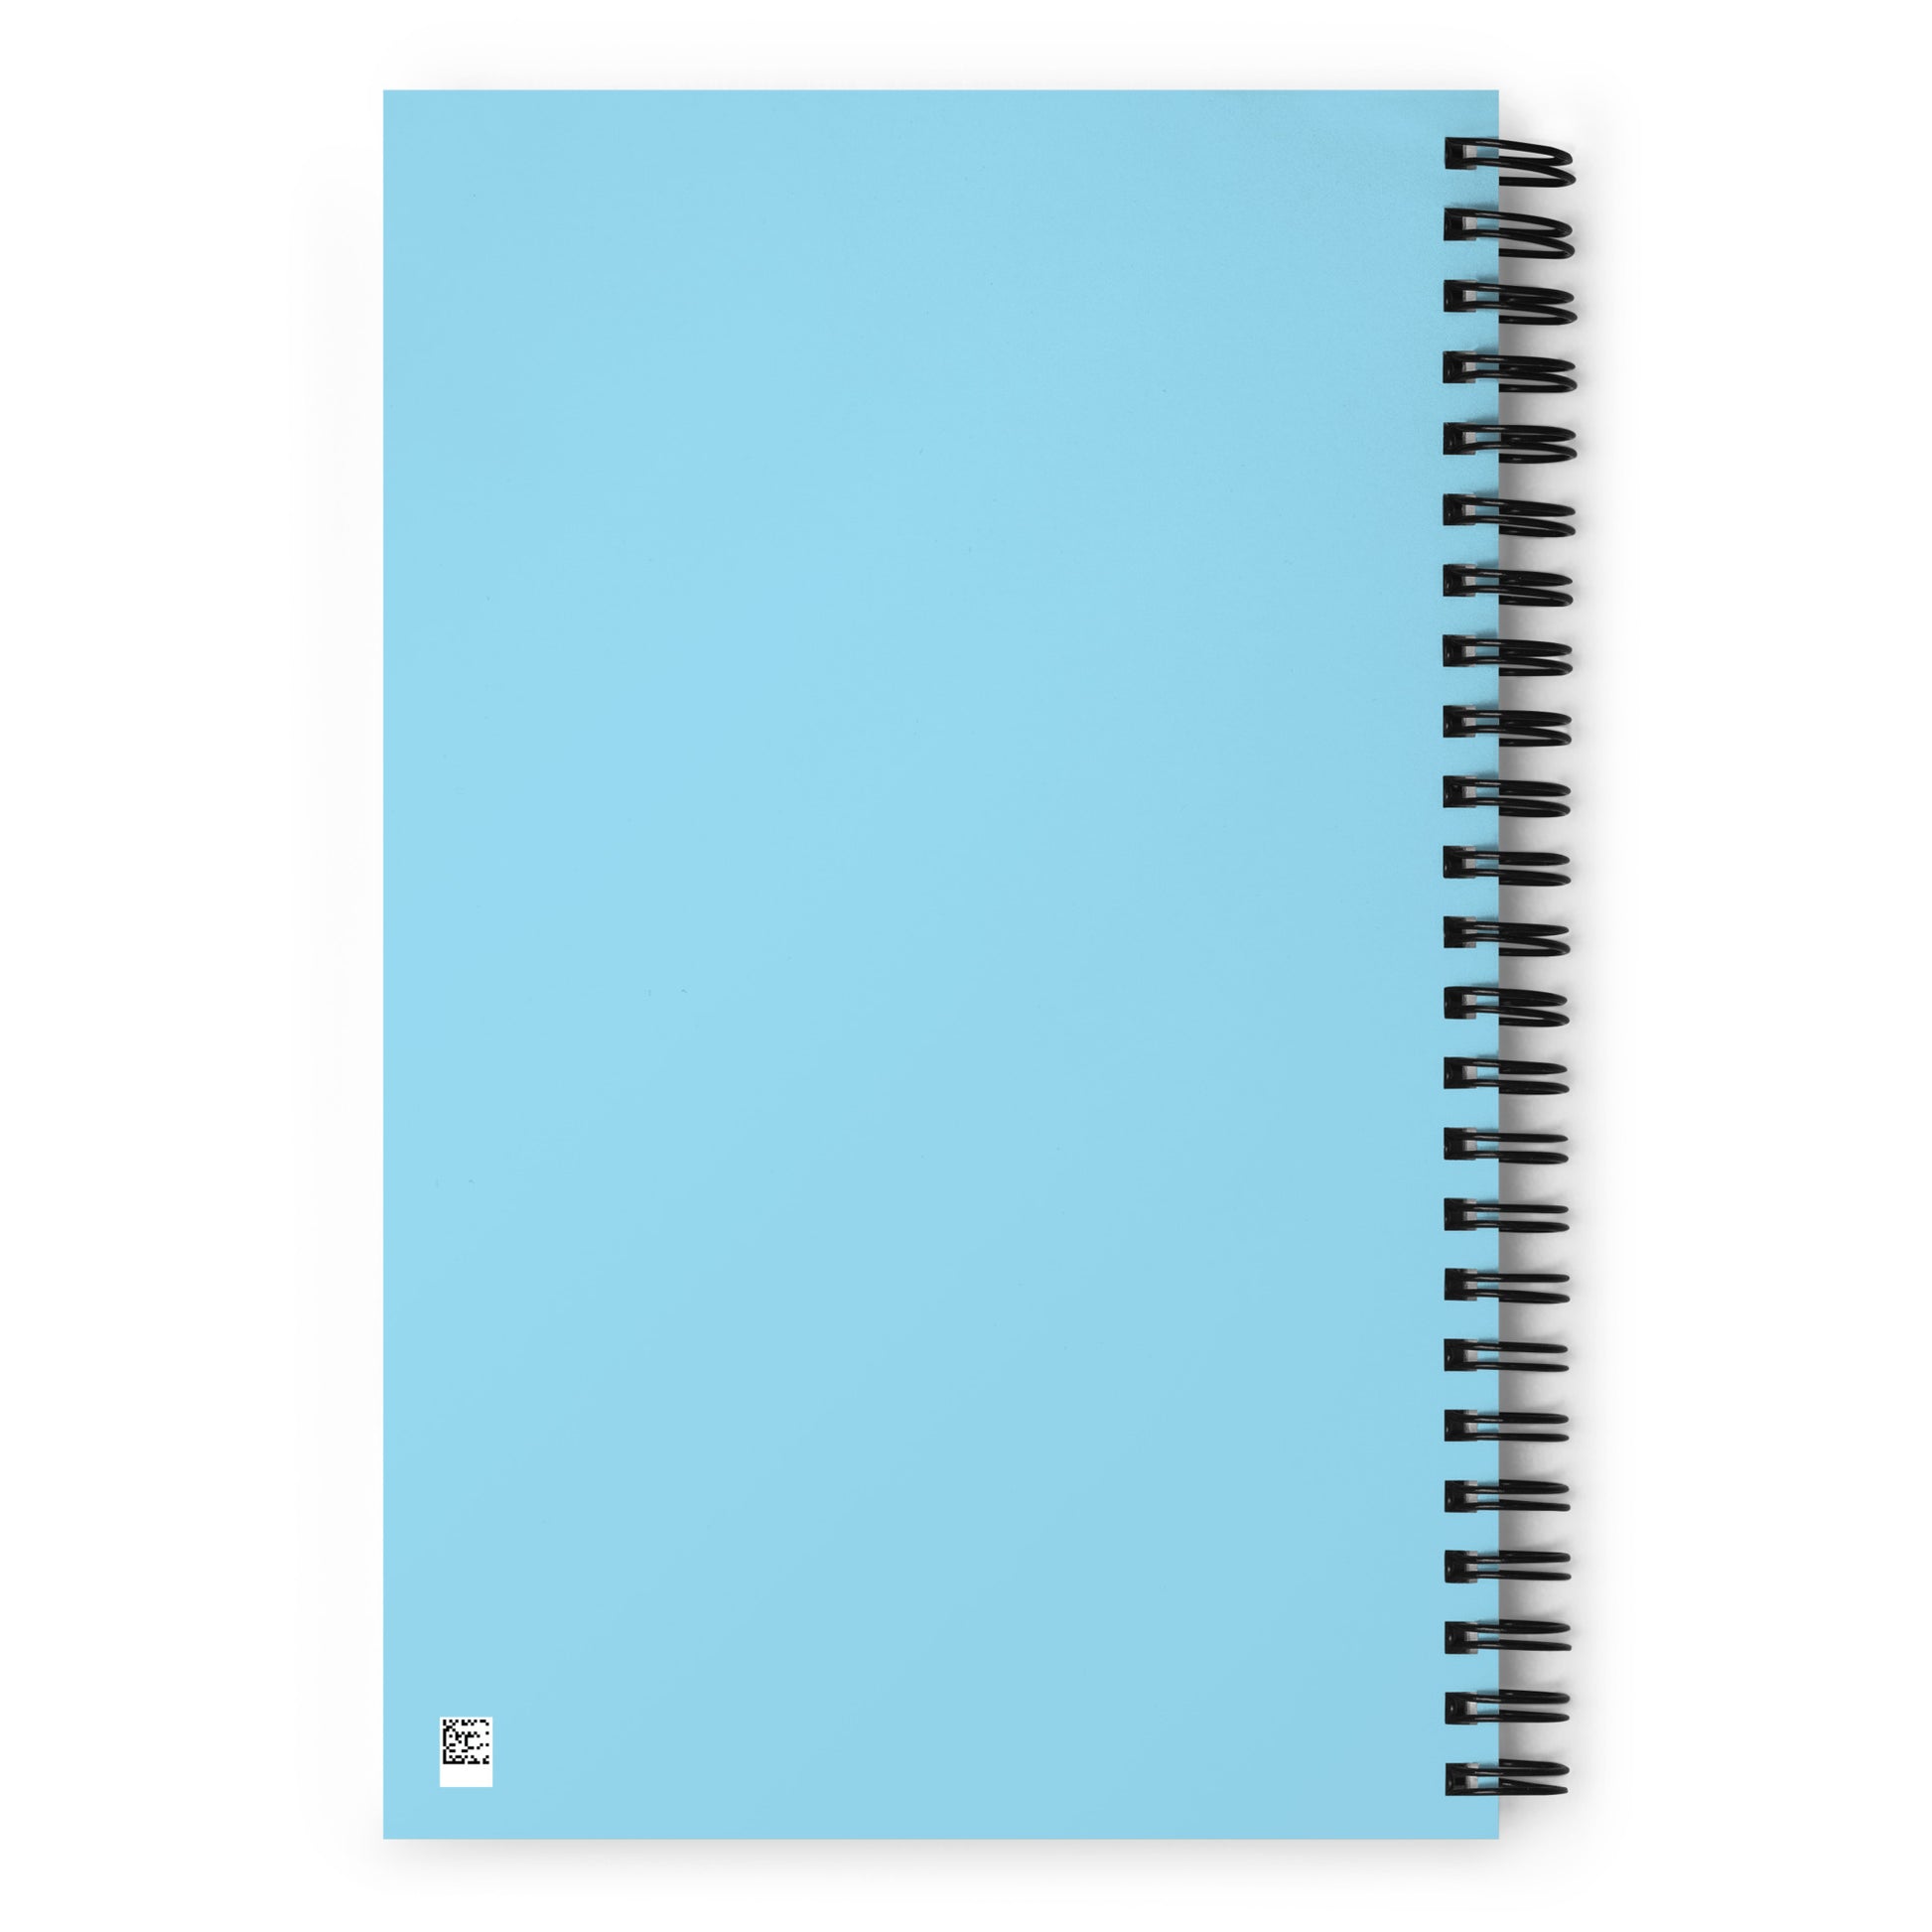 The back side of a blue wirebound notebook.